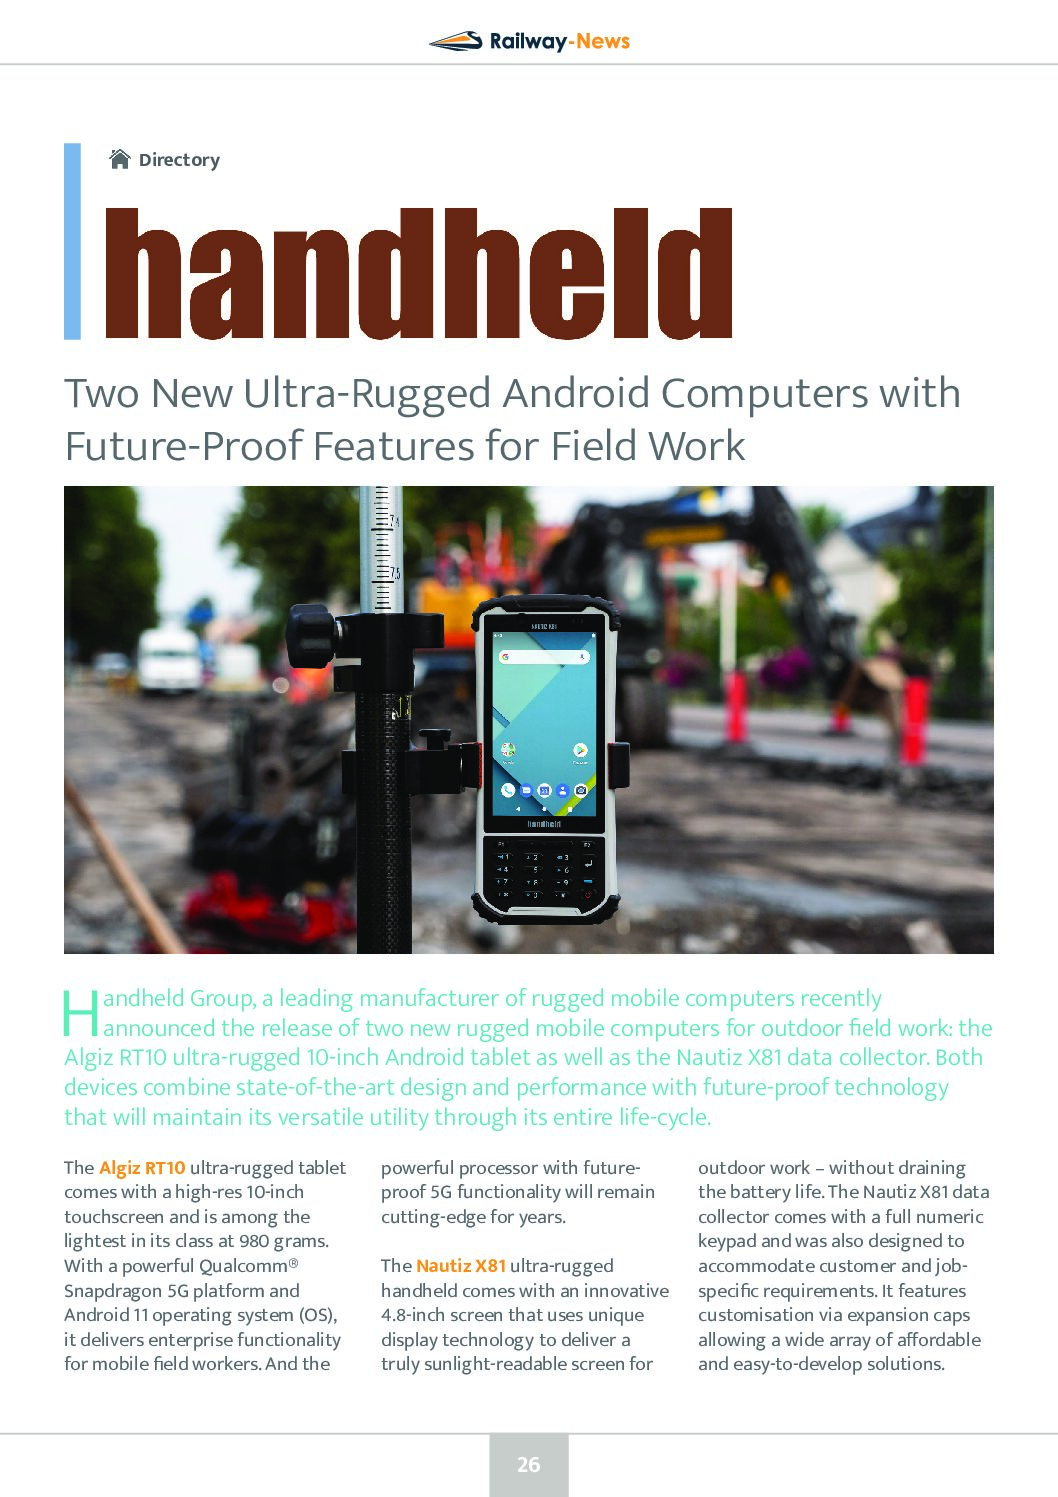 Two New Ultra-Rugged Android Computers for Field Work